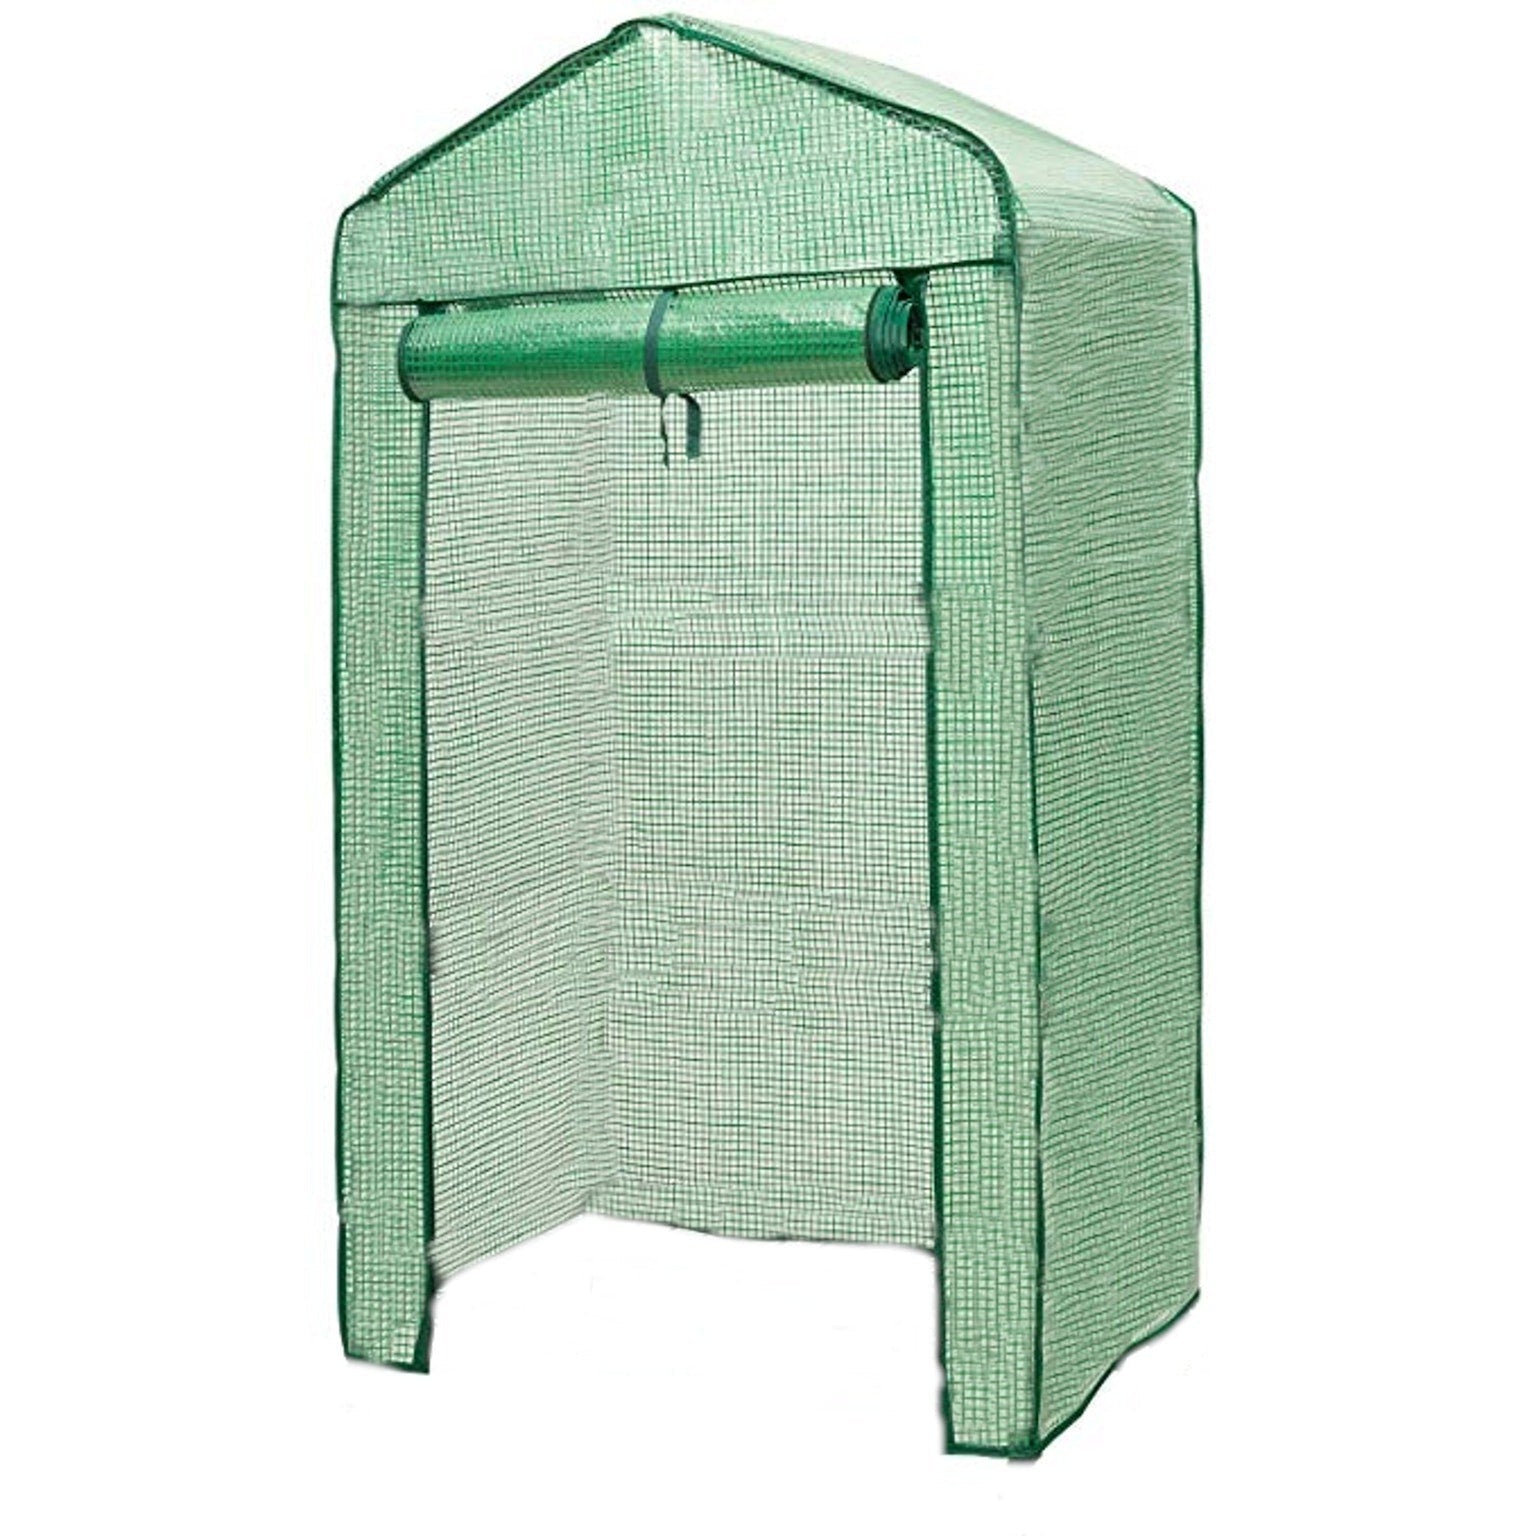 3 Tier Portable Rolling Greenhouse Opaque Top - Green Thumb Depot